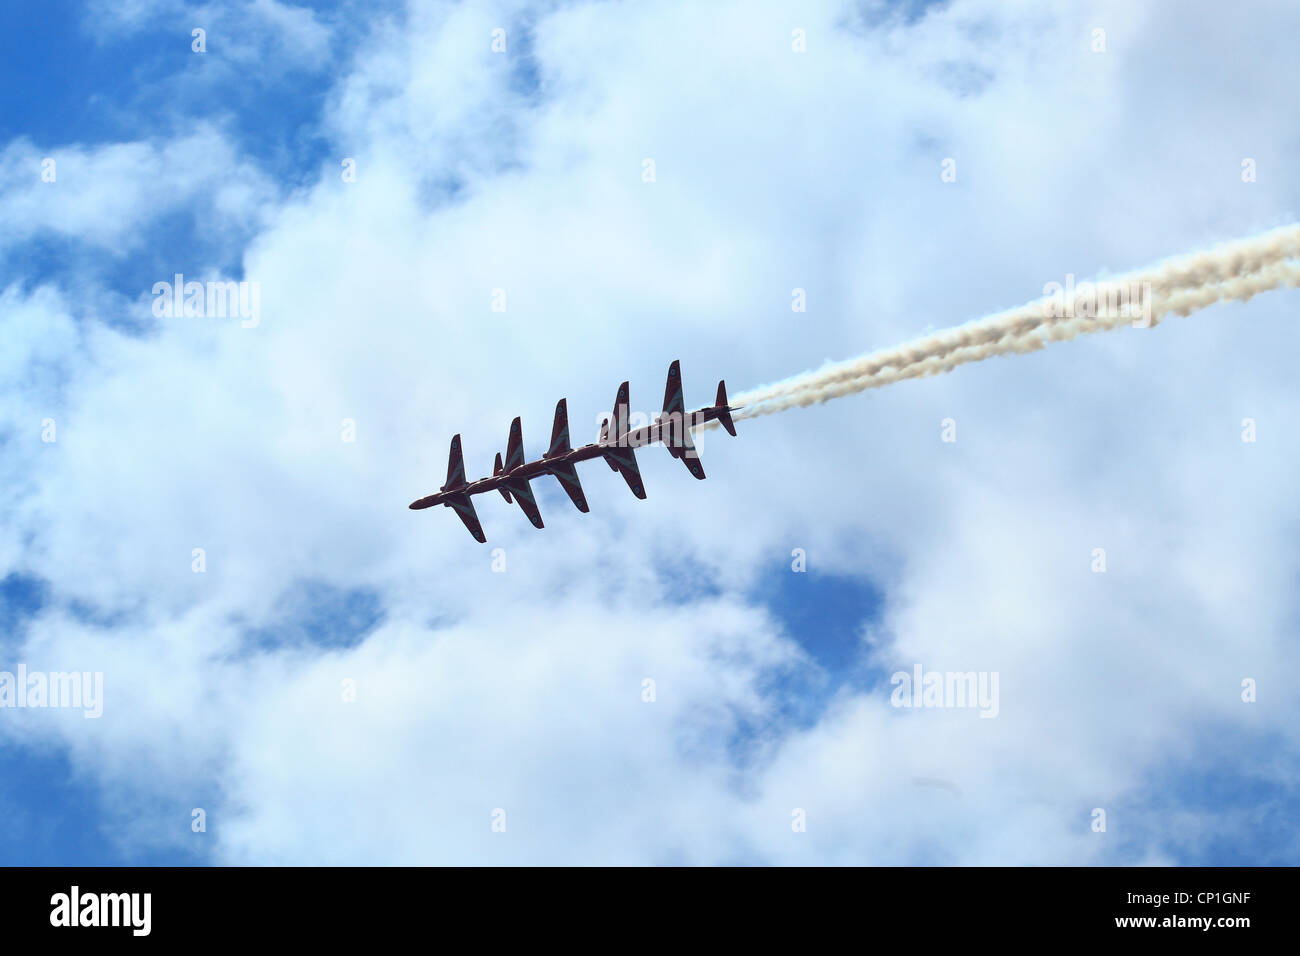 Royal Air Force Red Arrows 2011 Goodwood Festival of Speed Stockfoto